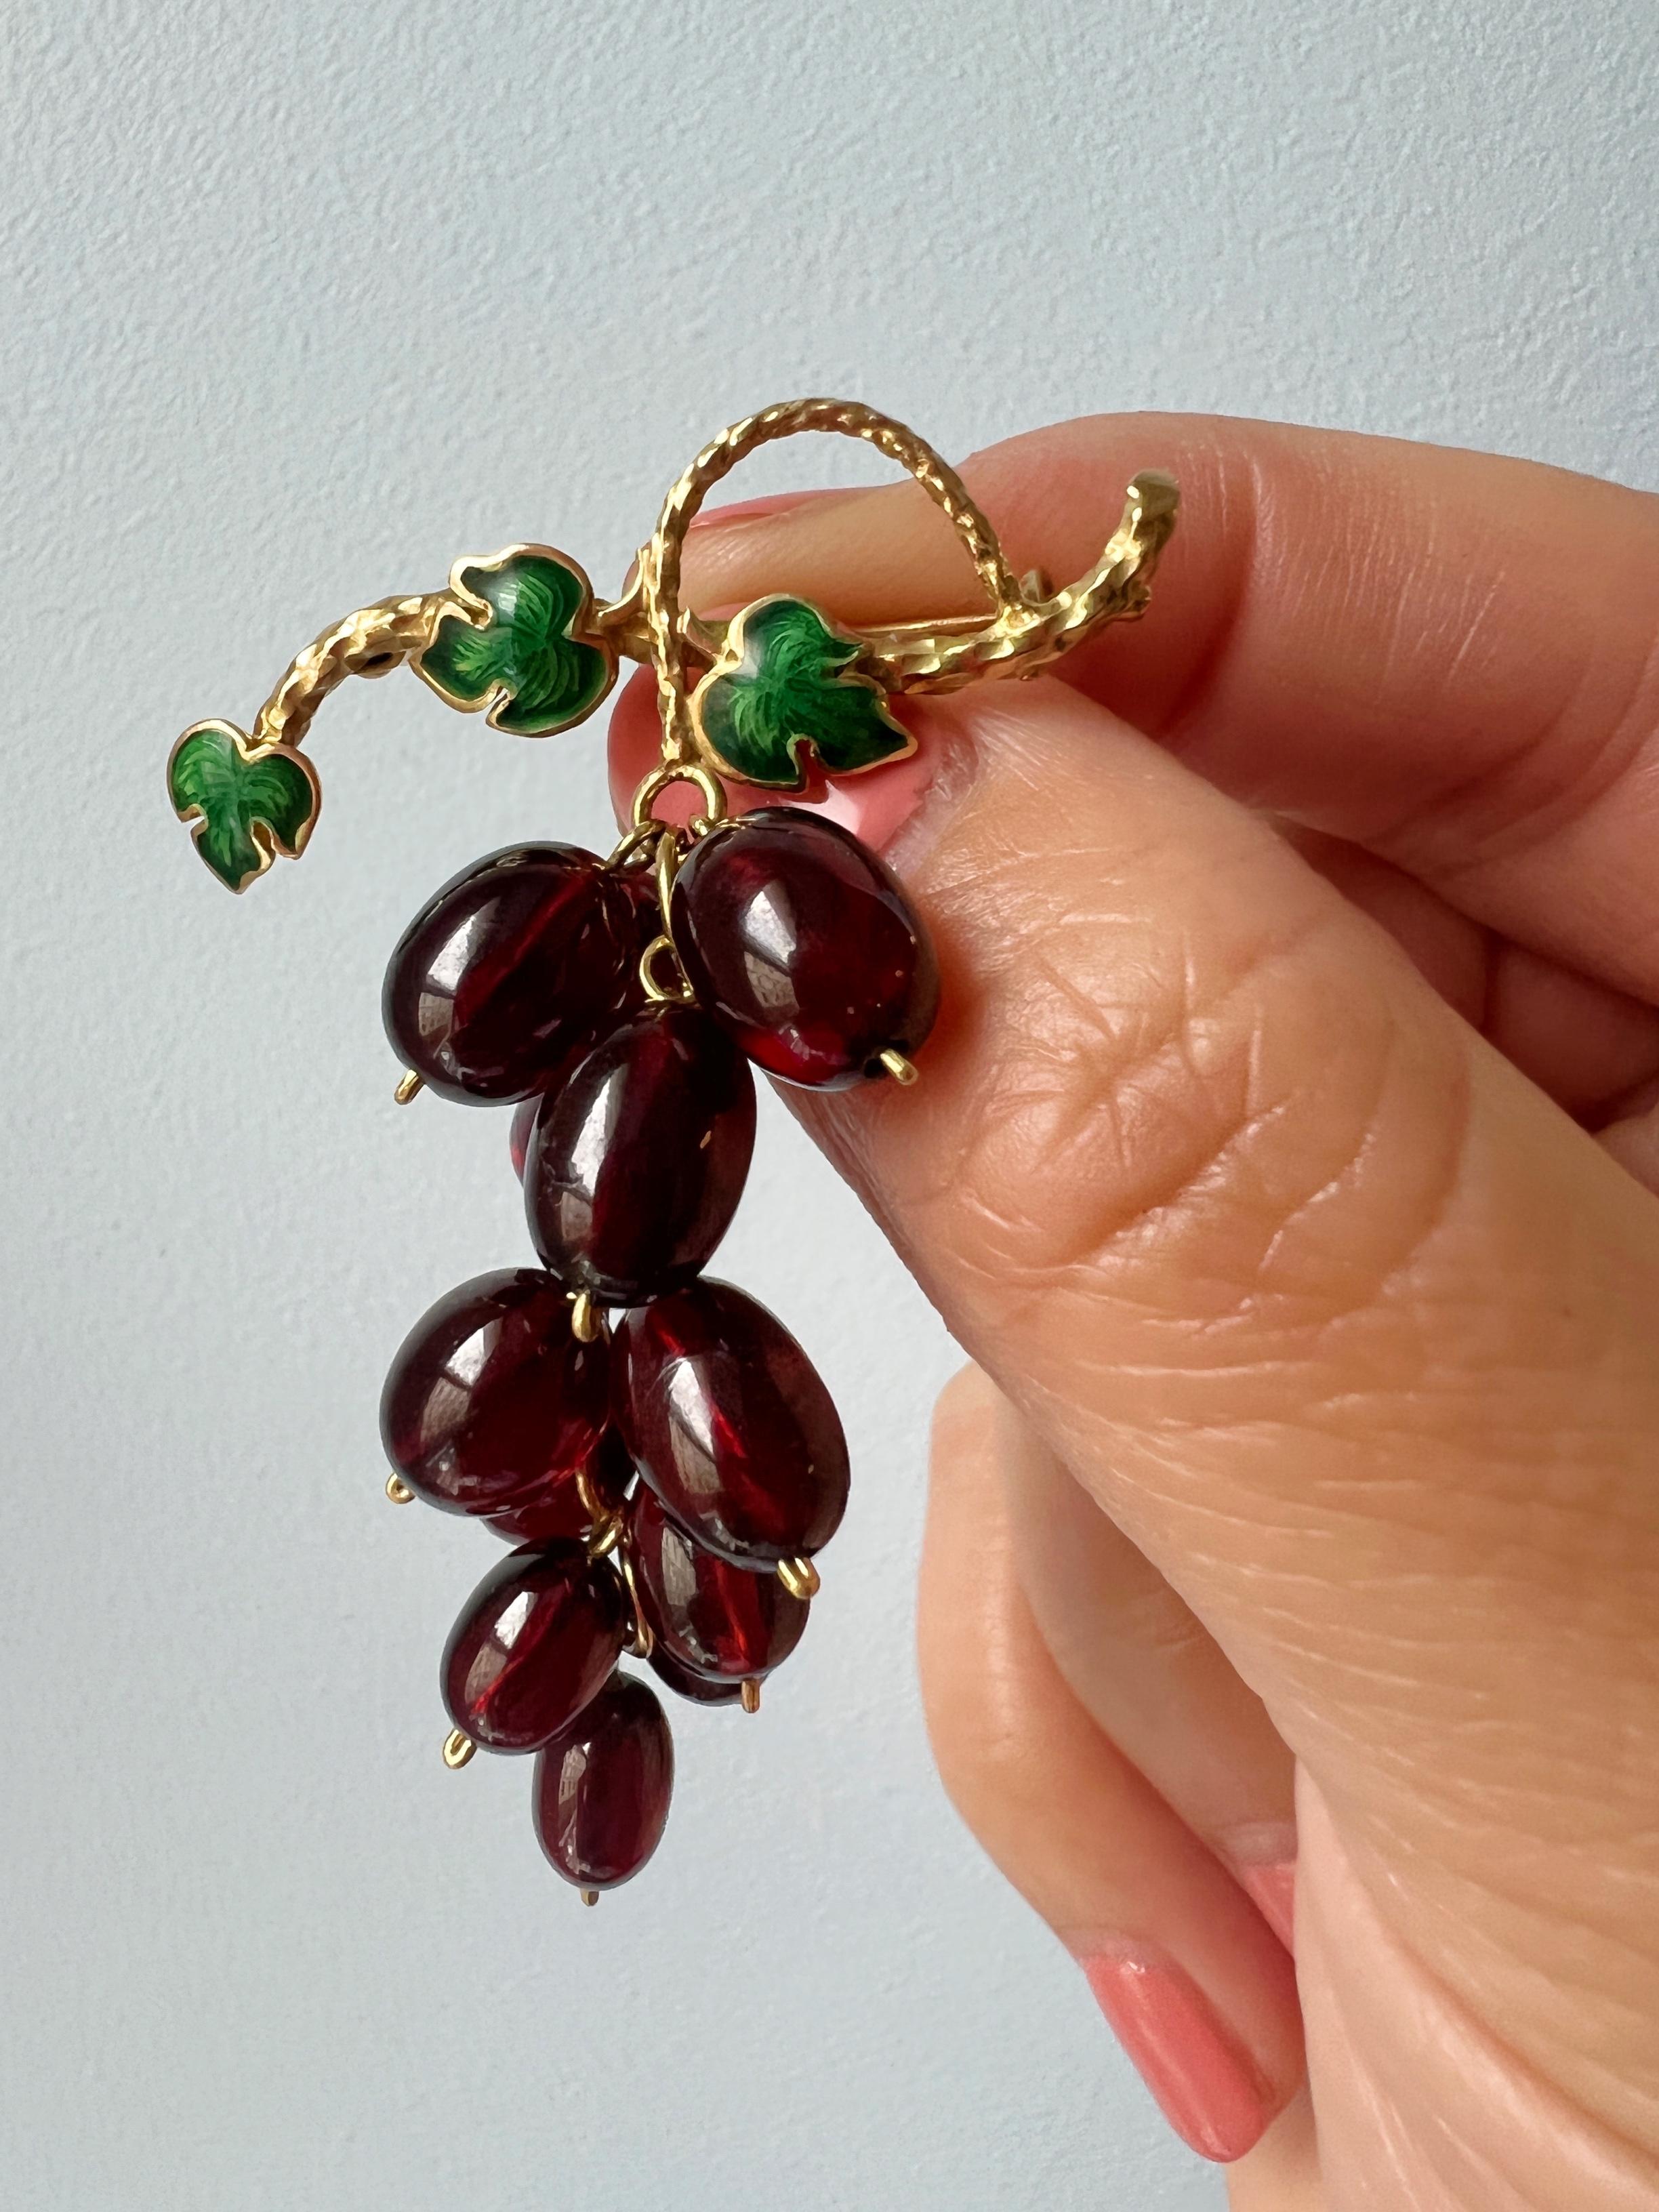 Sculptural, delightful and extremely skillfully crafted, this very rare and luxurious garnet grape brooch is among our favorite findings of the season!

This “delicious” brooch features a bunch of grapes made of 13 garnet cabochons in juicy deep red